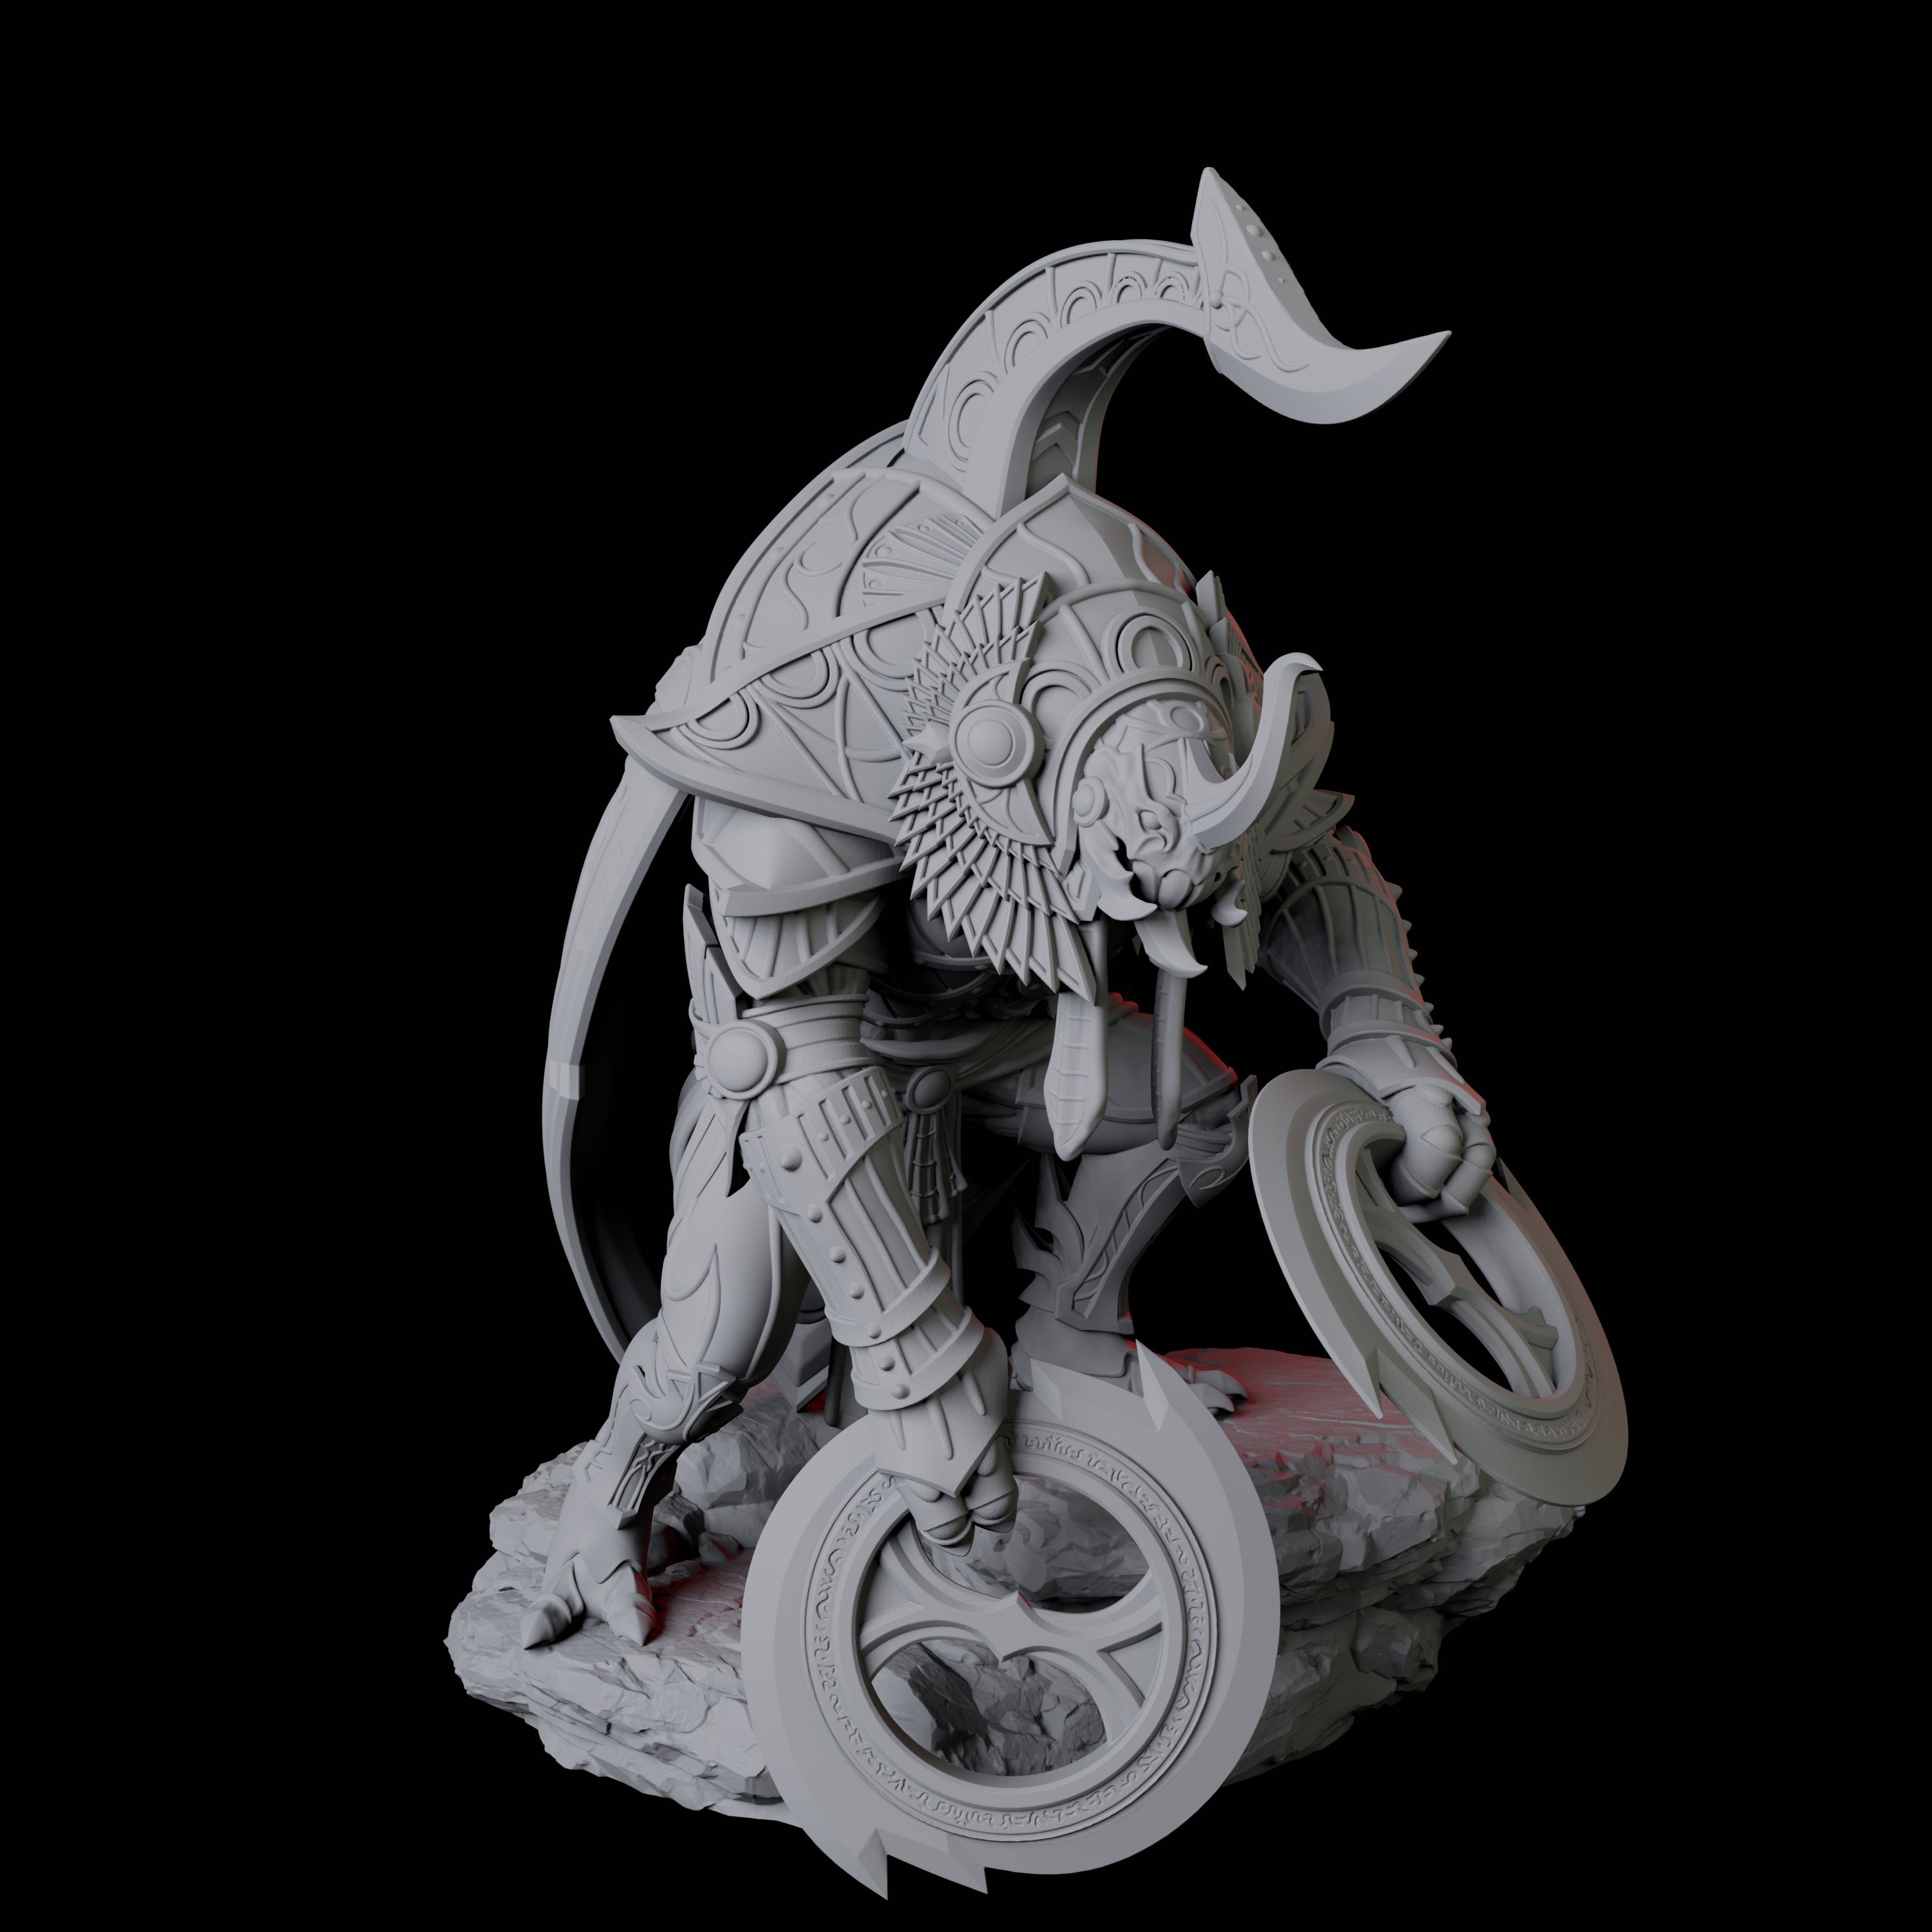 Giant Scarab Warrior C Miniature for Dungeons and Dragons, Pathfinder or other TTRPGs